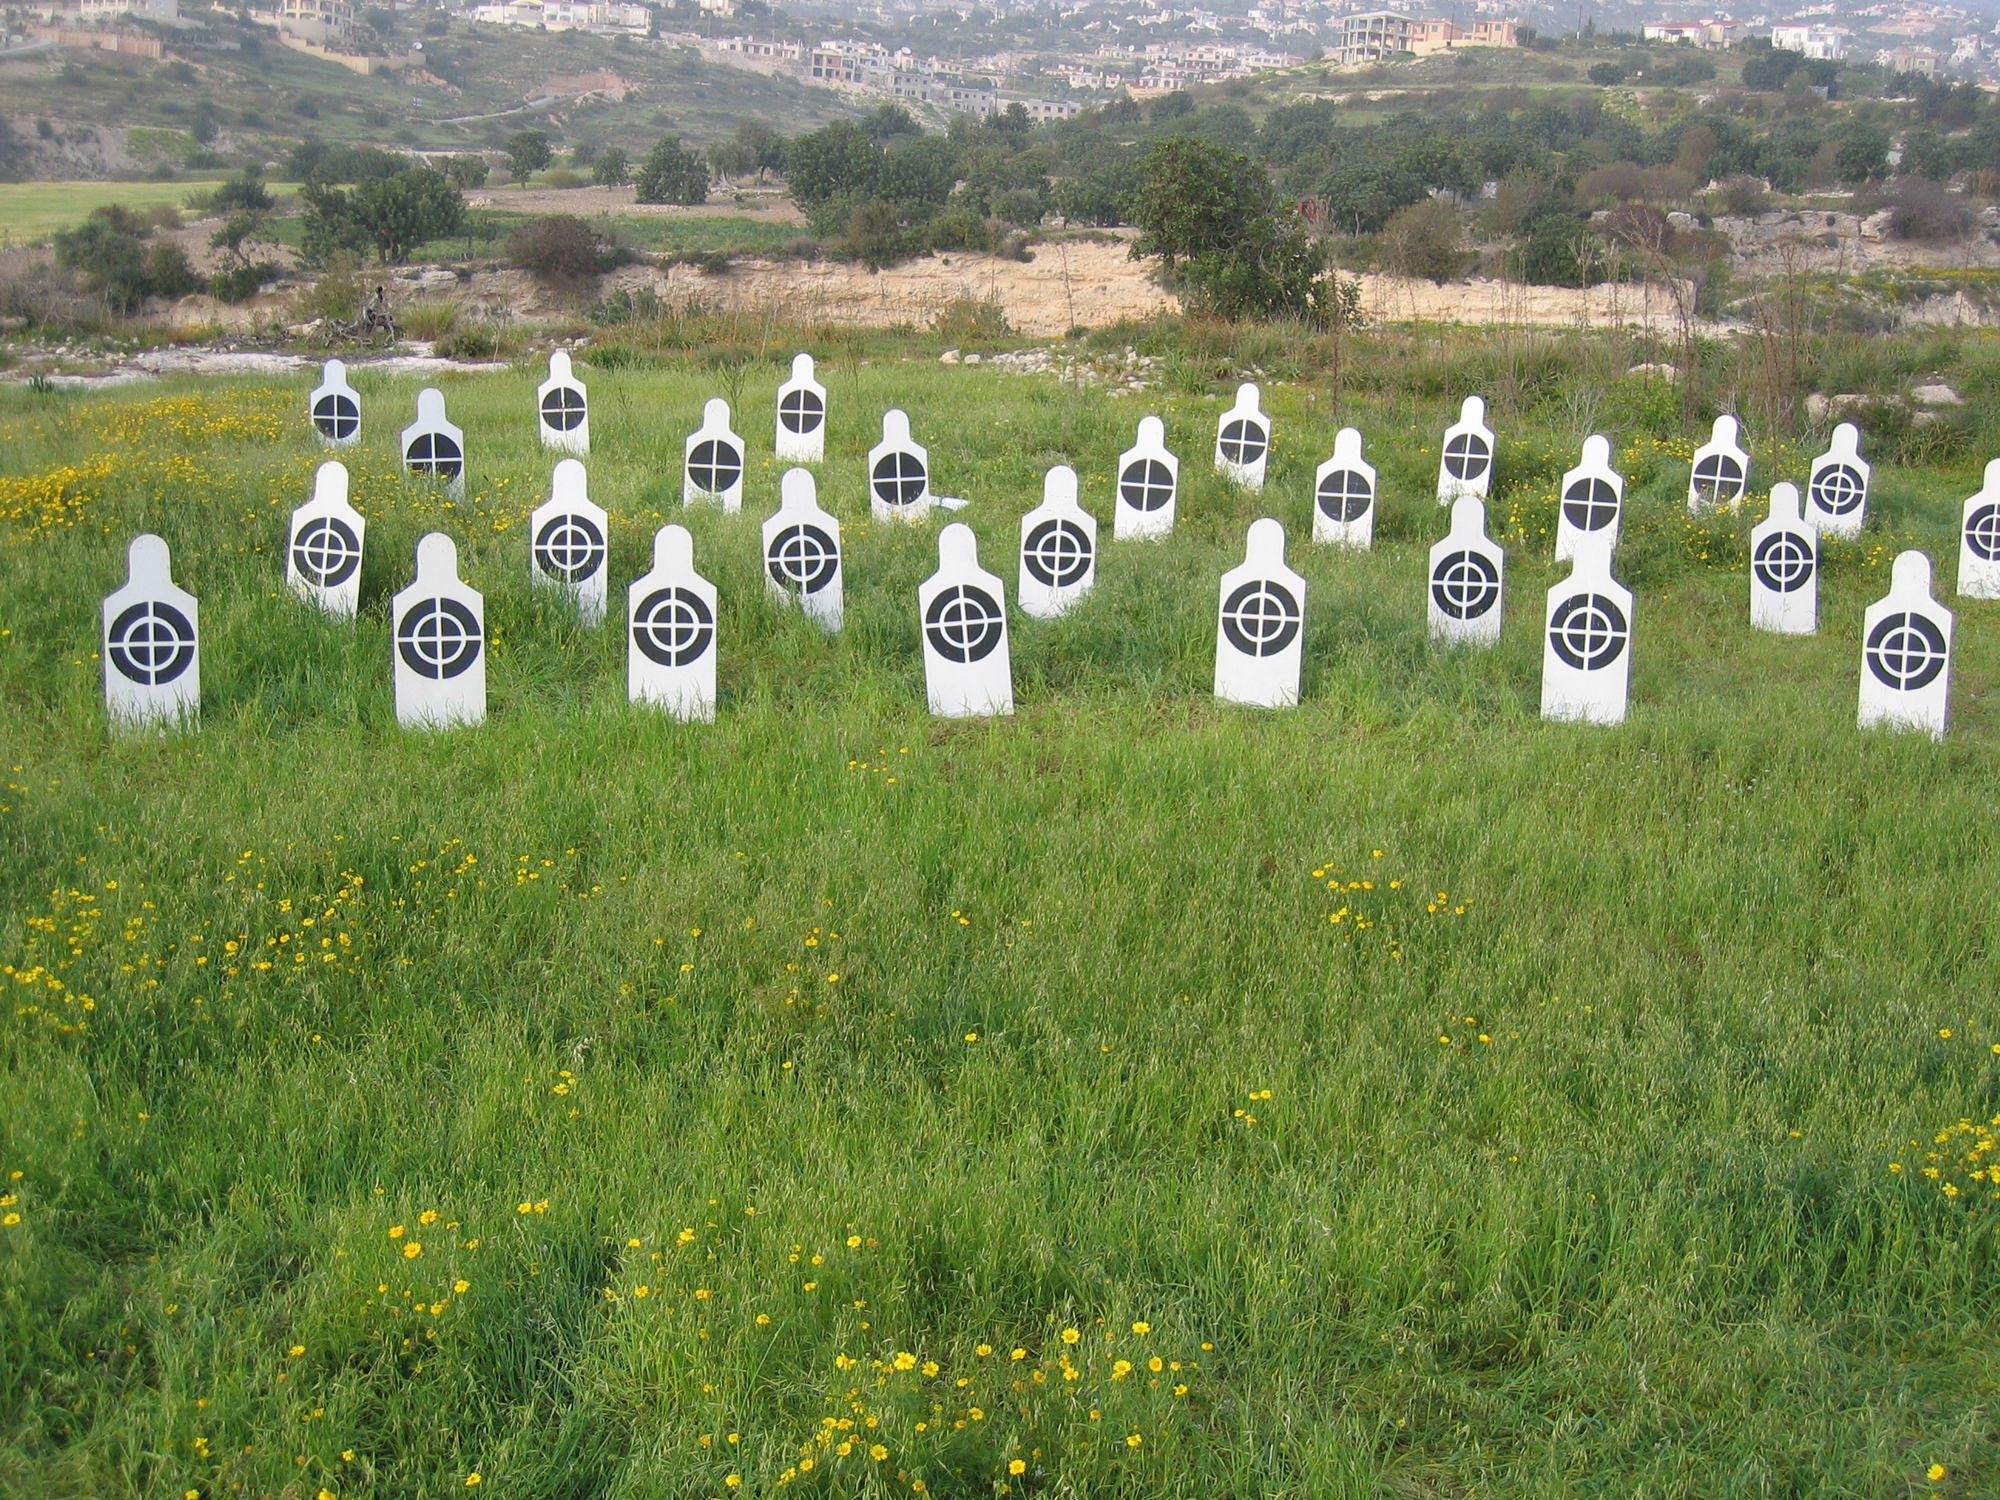 White human figures in line with black targets on their chest